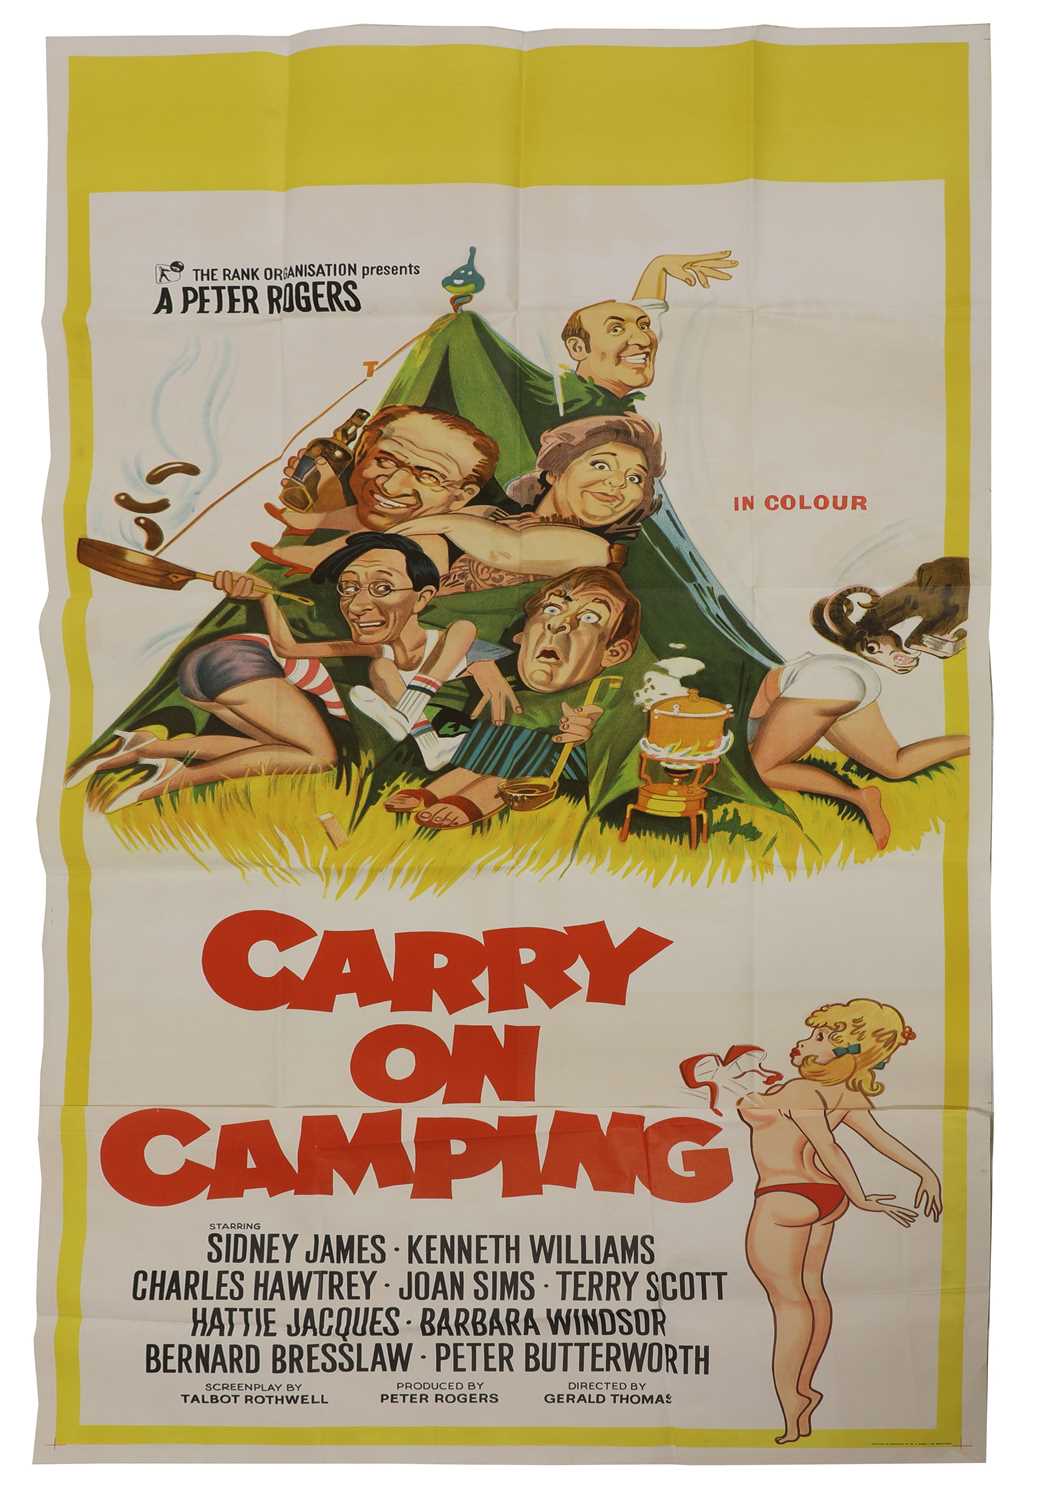 A film poster for 'Carry On Camping',